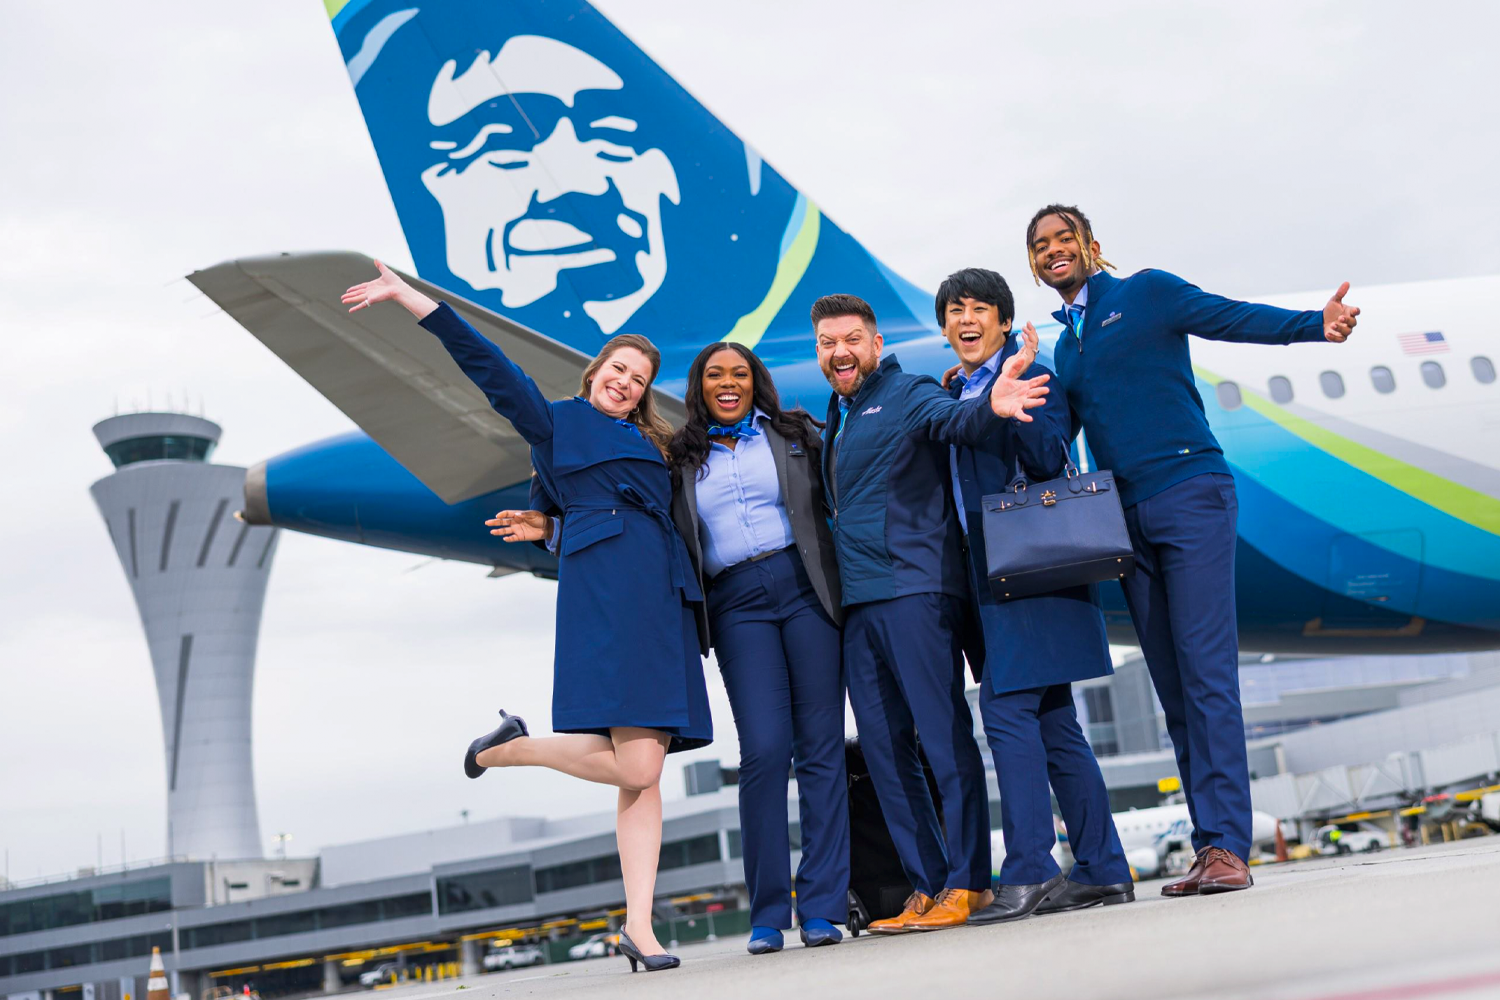 Alaska Has Become the First Airline to Introduce Gender-Neutral Uniforms